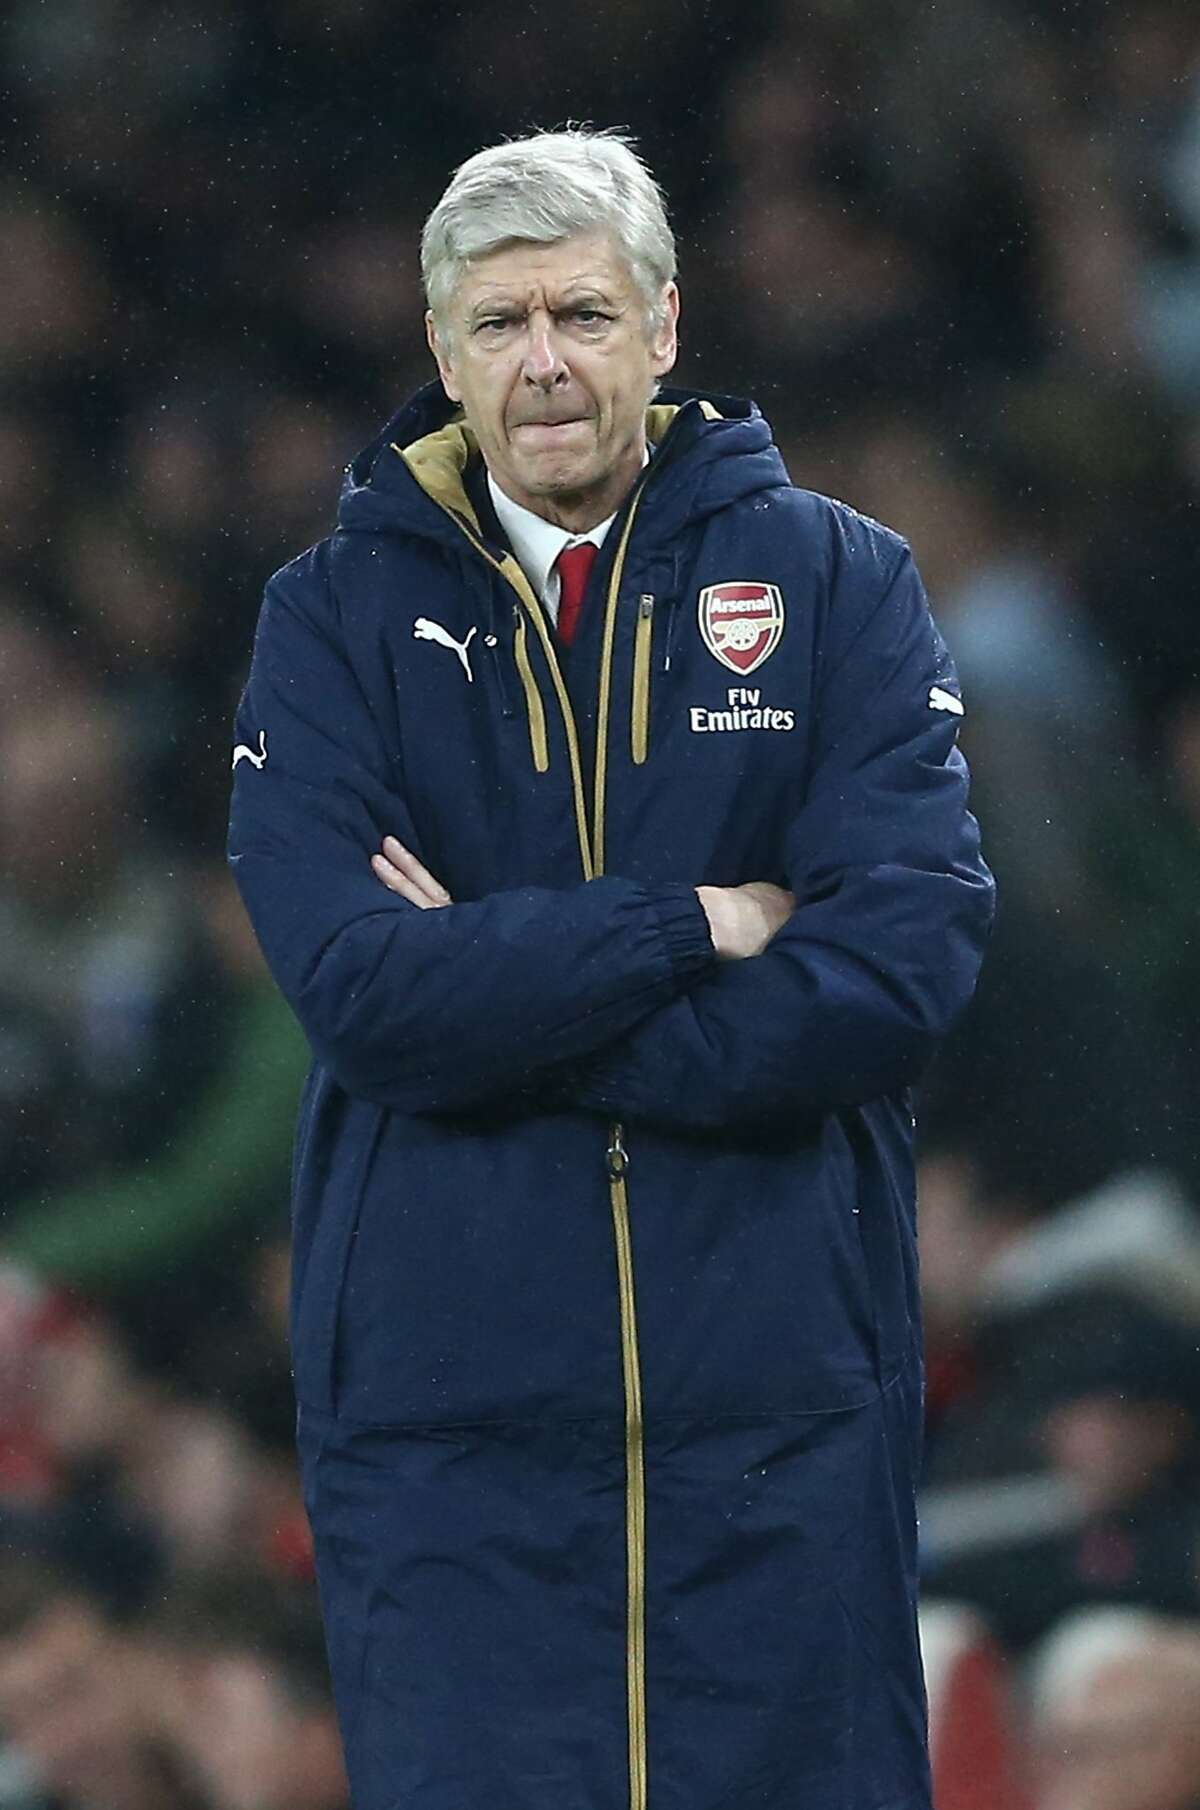 Arsenal's French manager Arsene Wenger looks on during the English Premier League football match between Arsenal and Everton at the Emirates Stadium in London on October 24, 2015. AFP PHOTO / JUSTIN TALLIS RESTRICTED TO EDITORIAL USE. No use with unauthorized audio, video, data, fixture lists, club/league logos or 'live' services. Online in-match use limited to 75 images, no video emulation. No use in betting, games or single club/league/player publications.JUSTIN TALLIS/AFP/Getty Images